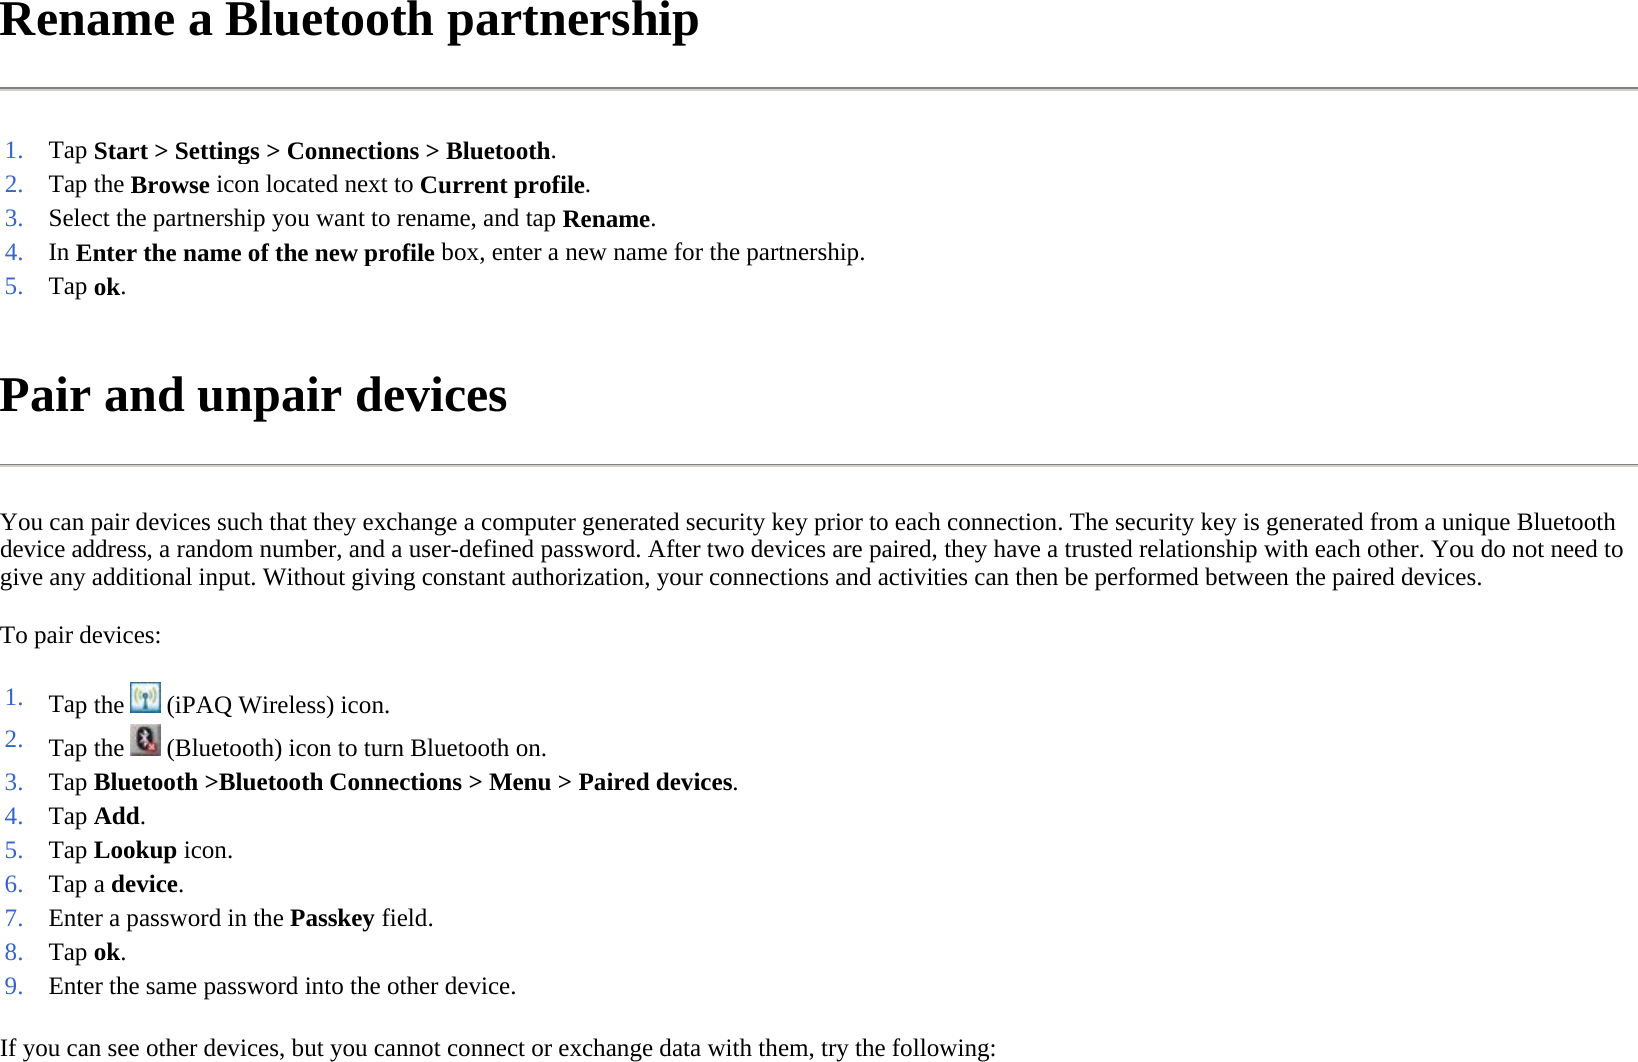 Rename a Bluetooth partnership  Pair and unpair devices  You can pair devices such that they exchange a computer generated security key prior to each connection. The security key is generated from a unique Bluetooth device address, a random number, and a user-defined password. After two devices are paired, they have a trusted relationship with each other. You do not need to give any additional input. Without giving constant authorization, your connections and activities can then be performed between the paired devices.  To pair devices:  If you can see other devices, but you cannot connect or exchange data with them, try the following:  1. Tap Start &gt; Settings &gt; Connections &gt; Bluetooth.2. Tap the Browse icon located next to Current profile.3. Select the partnership you want to rename, and tapRename.4. In Enter the name of the new profile box, enter a new name for the partnership.5. Tap ok. 1. Tap the   (iPAQ Wireless) icon. 2. Tap the   (Bluetooth) icon to turn Bluetooth on.3. Tap Bluetooth &gt;Bluetooth Connections &gt;Menu &gt;Paired devices.4. Tap Add. 5. Tap Lookup icon.6. Tap a device. 7. Enter a password in the Passkey field. 8. Tap ok. 9. Enter the same password into the other device.